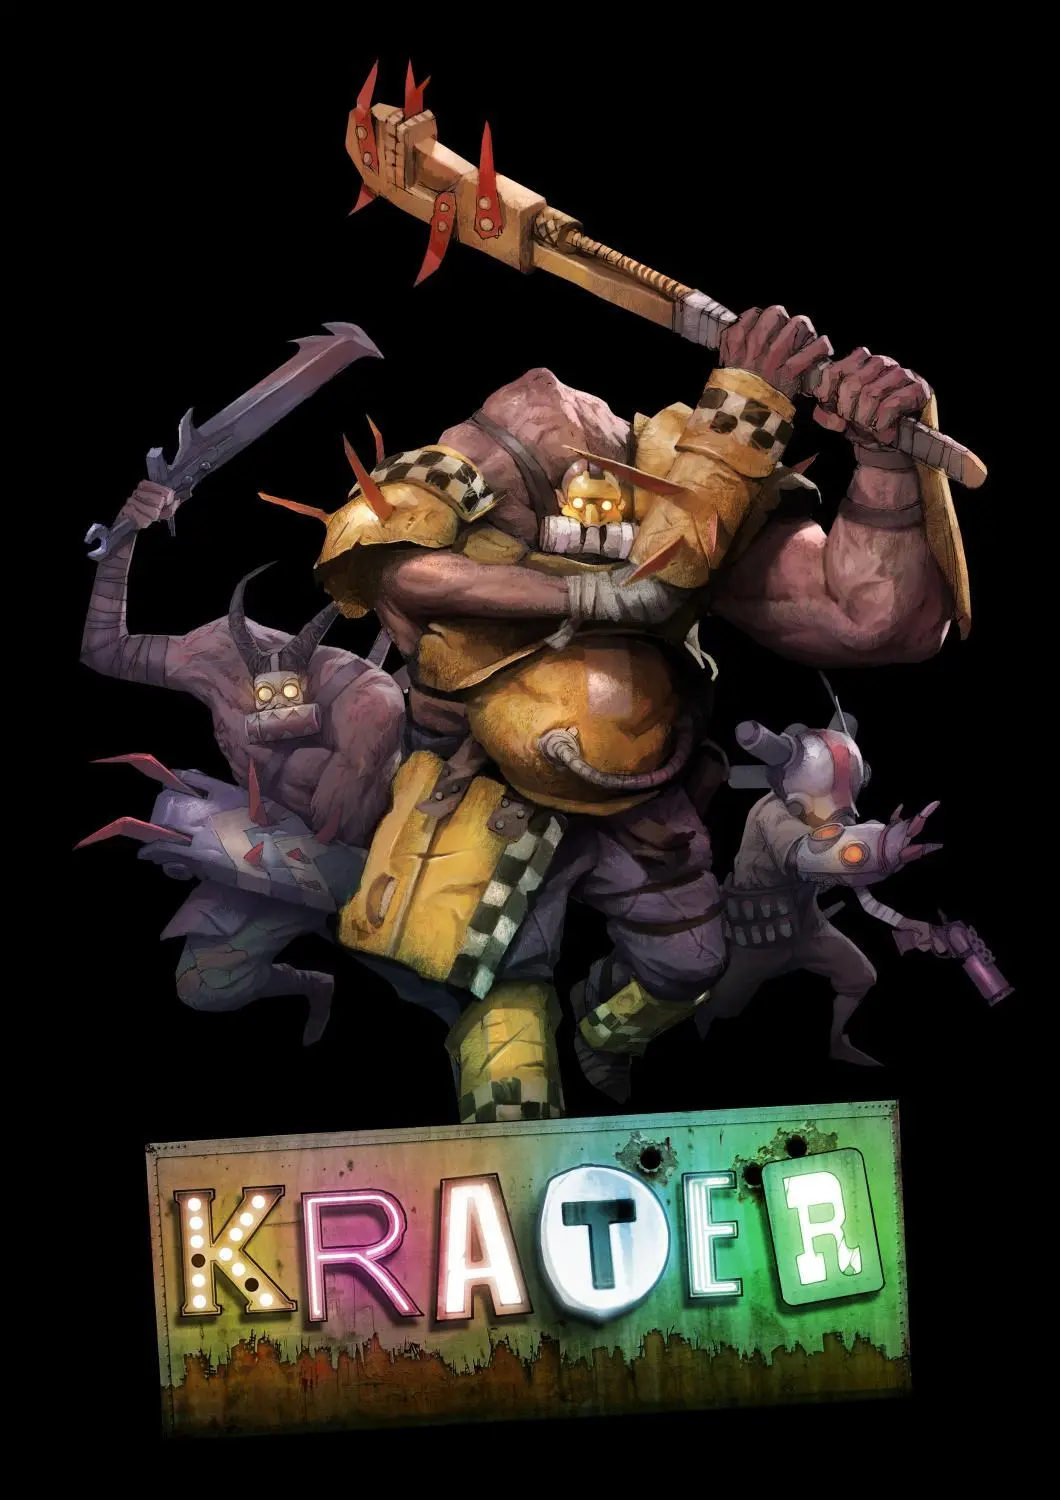 Krater - Collector's Edition (PC / Mac) - Steam - Digital Code